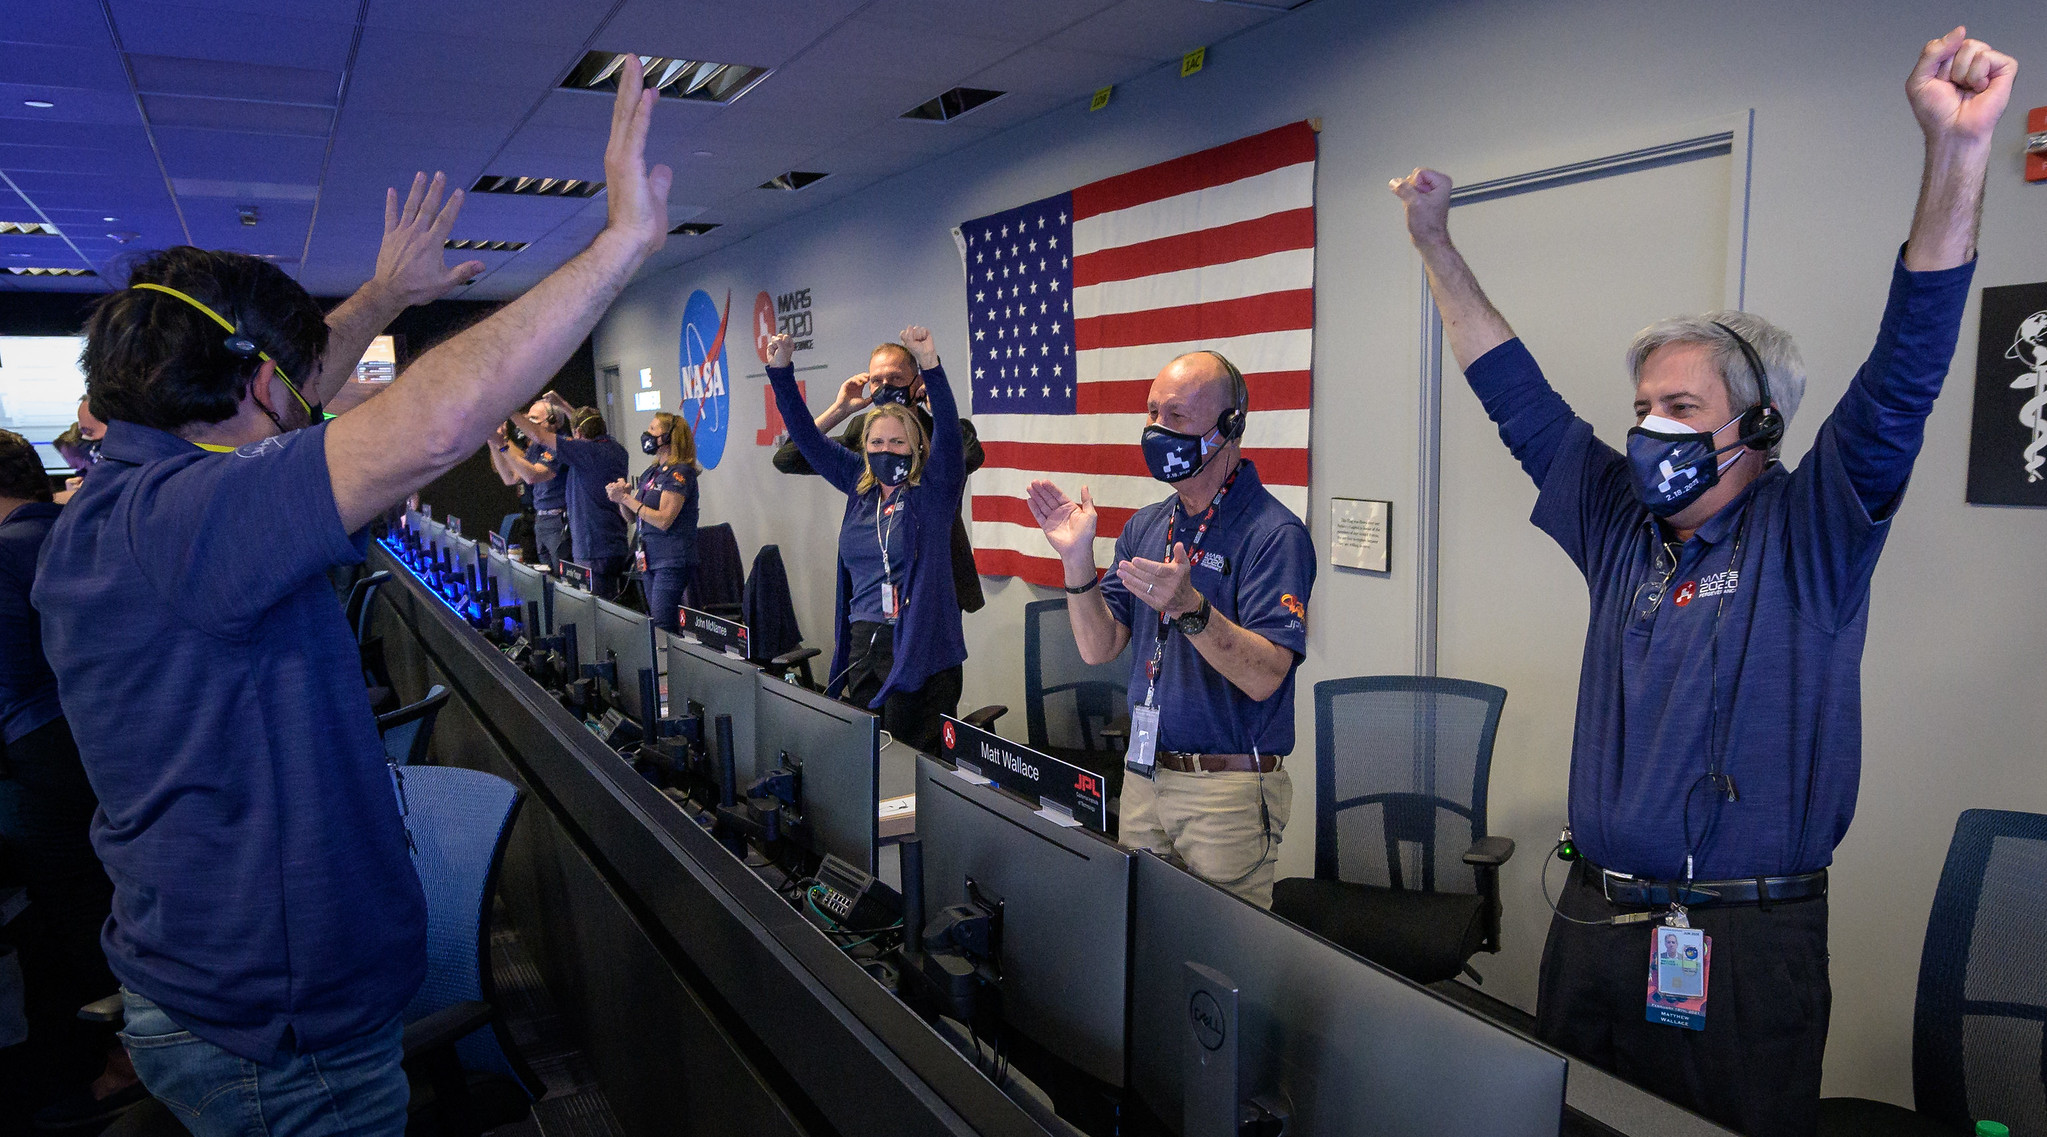 Members of NASA’s Perseverance rover team react in mission control after receiving confirmation the spacecraft successfully touched down on Mars, Thursday, Feb. 18, 2021, at NASA's Jet Propulsion Laboratory in Pasadena, California.